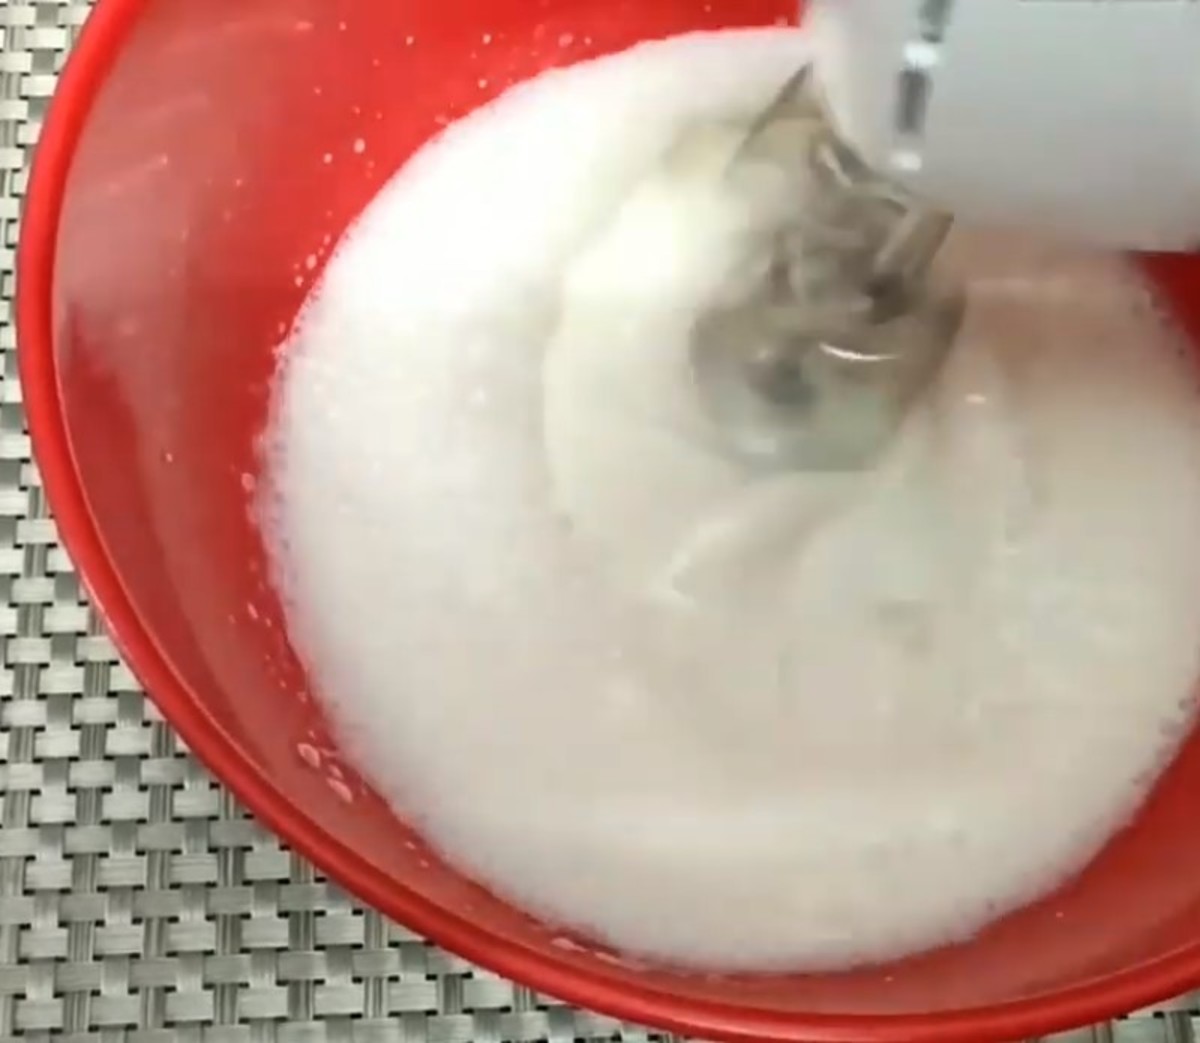 Beating whipping cream with a hand mixer